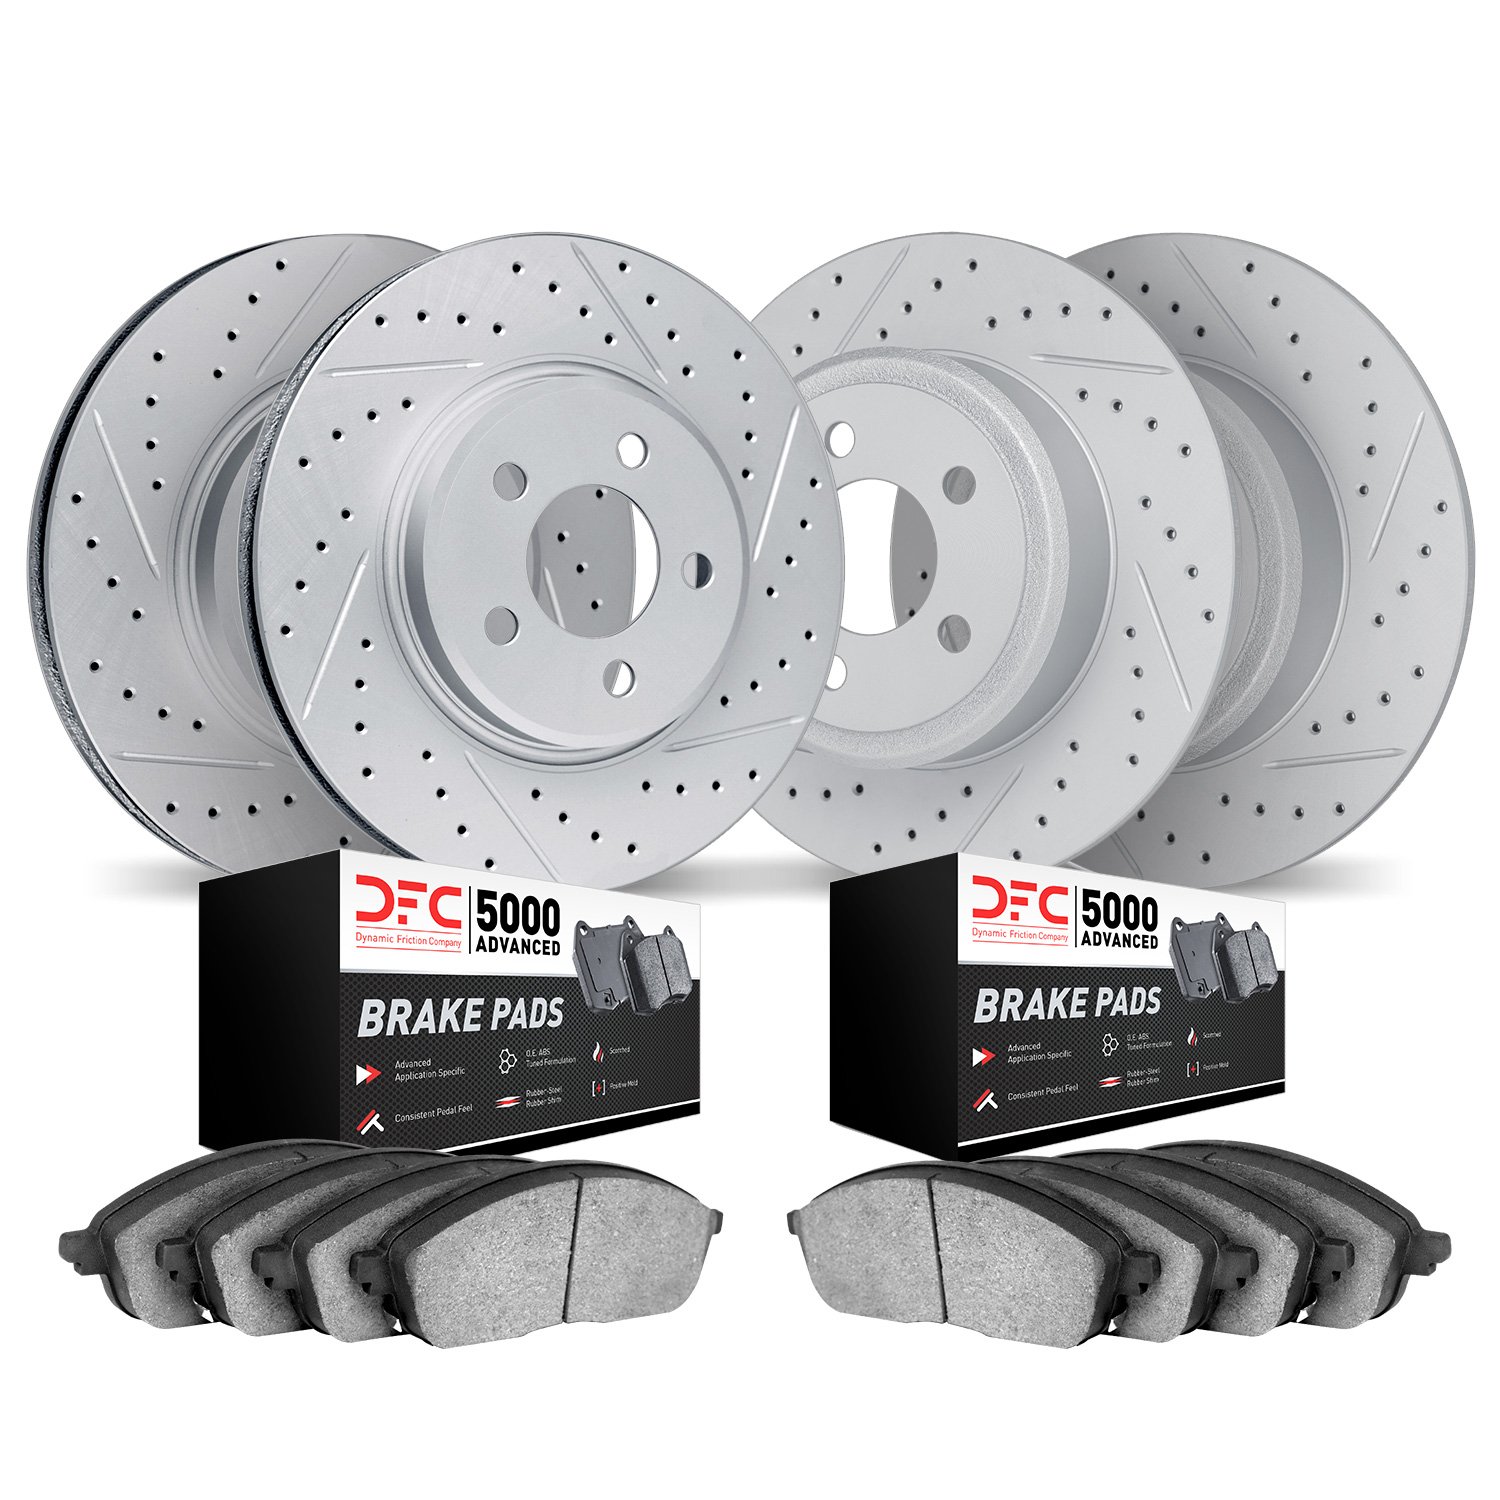 2504-59082 Geoperformance Drilled/Slotted Rotors w/5000 Advanced Brake Pads Kit, 2007-2015 Acura/Honda, Position: Front and Rear